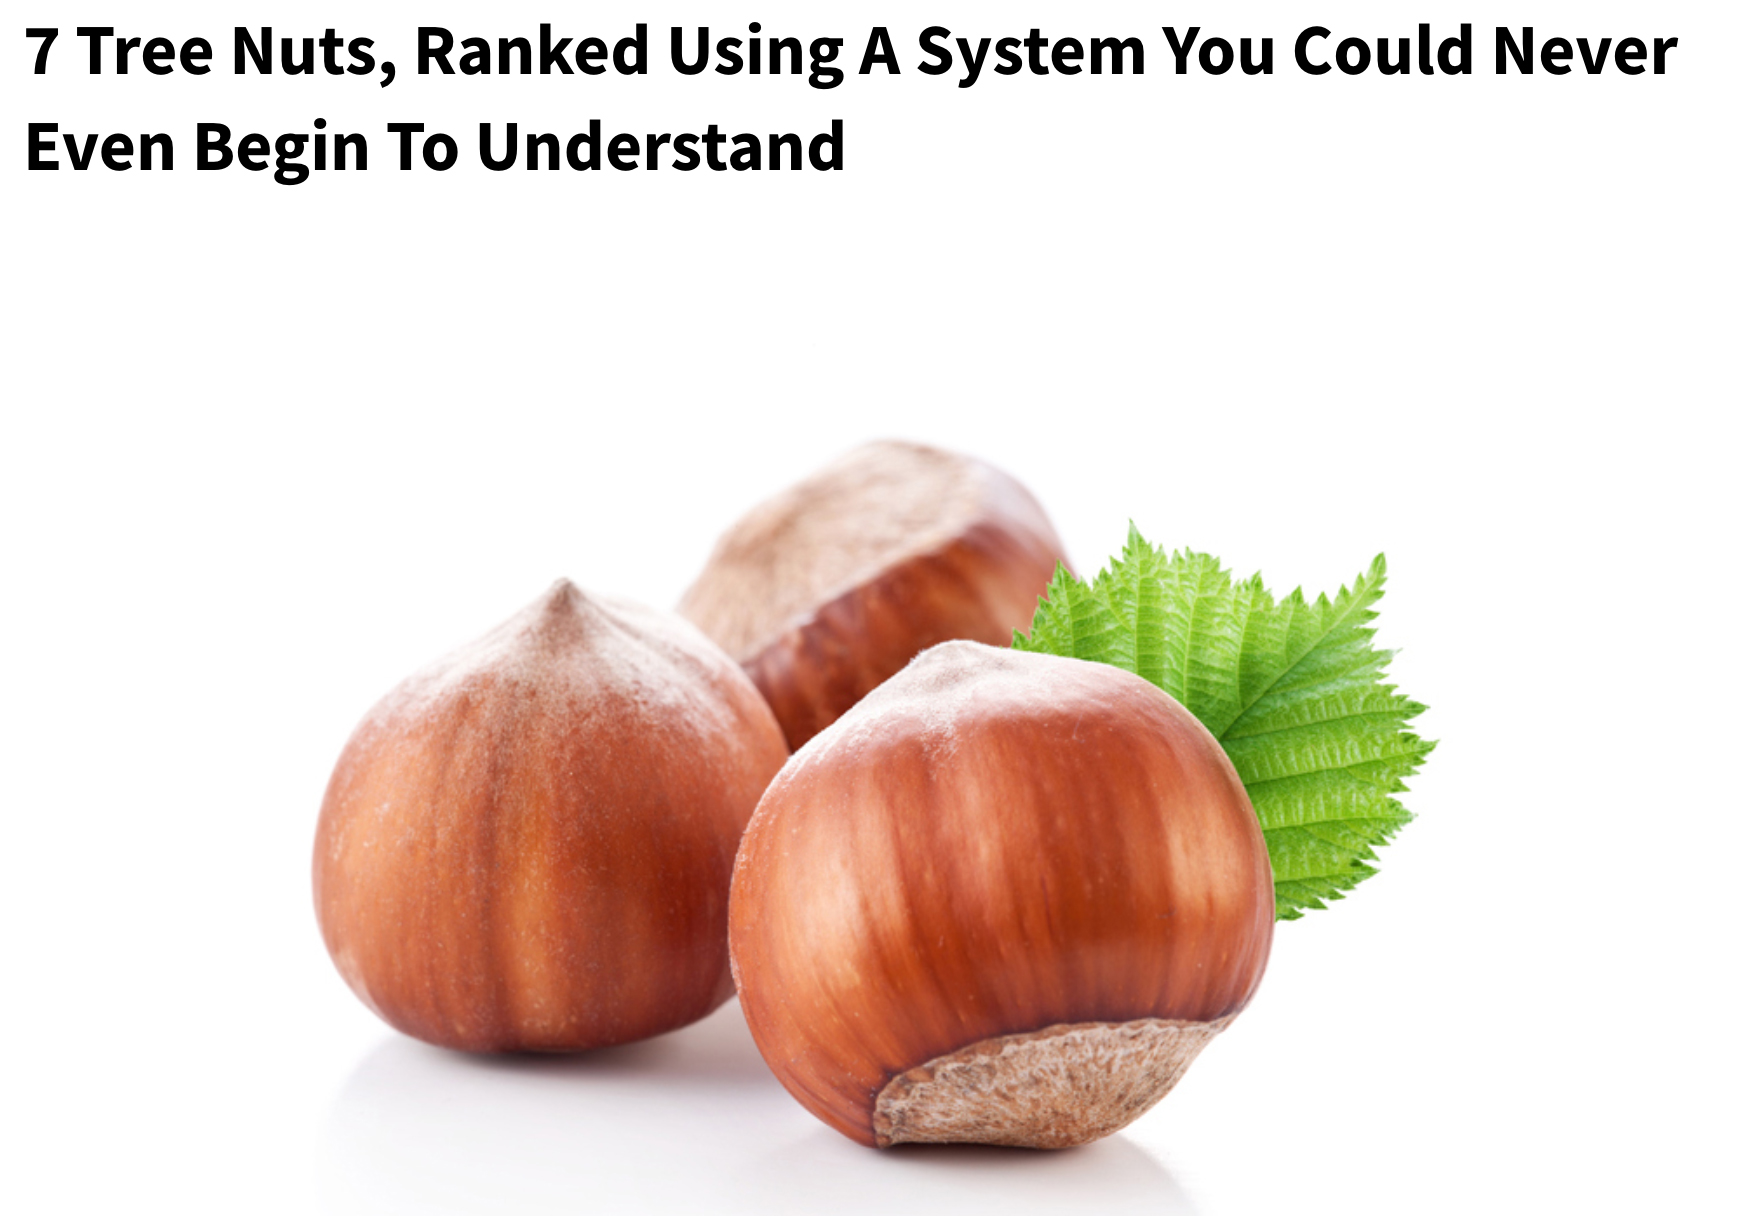 clickhole headlines - 7 Tree Nuts, Ranked Using A System You Could Never Even Begin To Understand